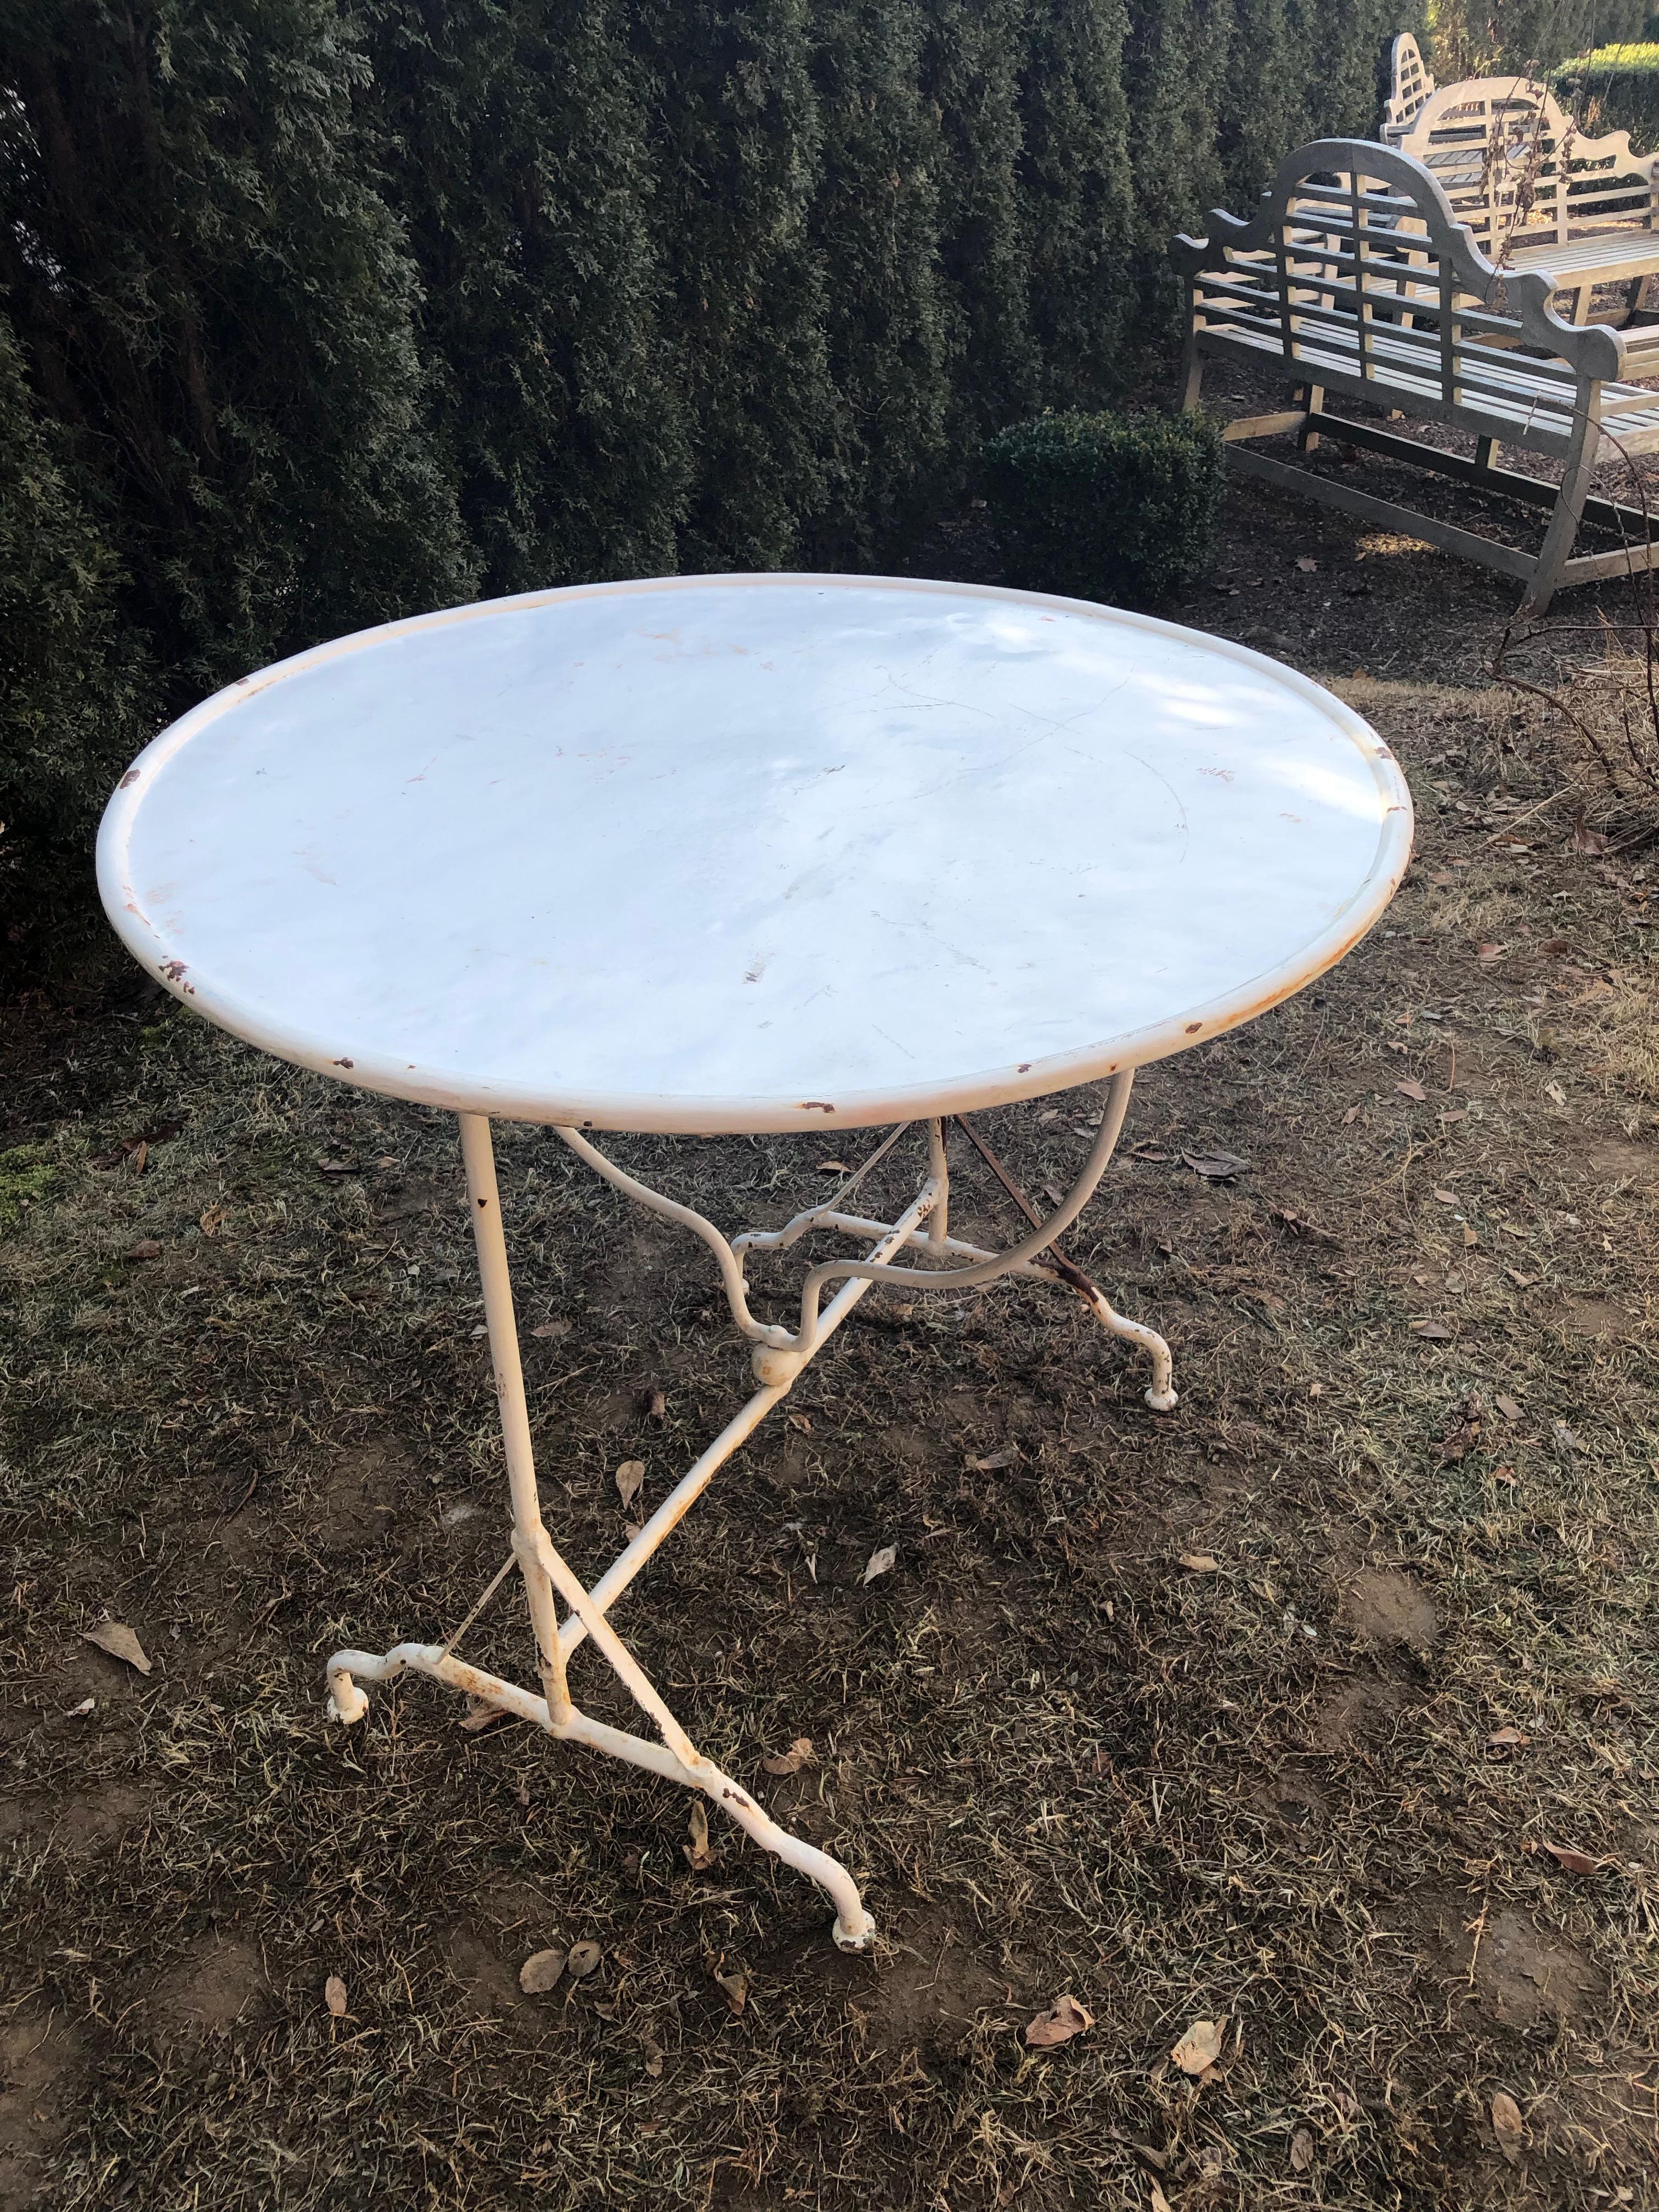 We love wine-tasting tables, but actually have never seen one in iron. From Lyon, the culinary capital of France, this beauty is the perfect space-saving table, indoors or out, and was likely used for mixing or sampling wines. It would make a great